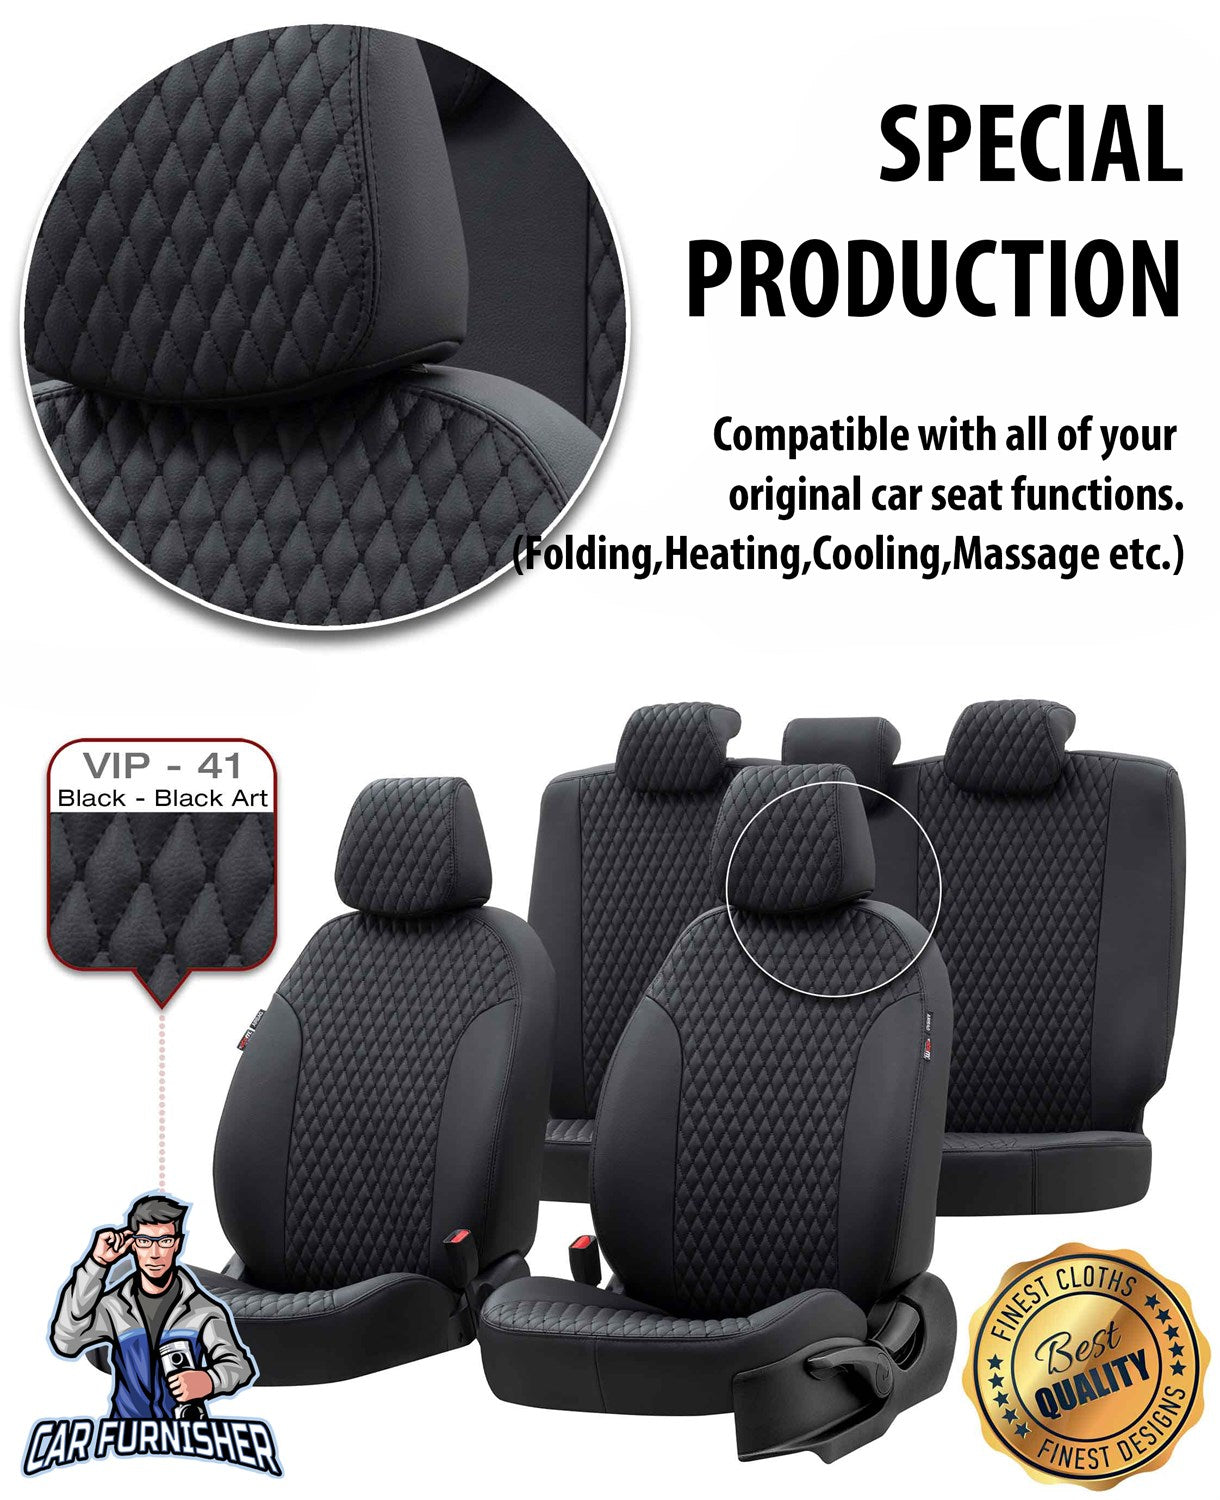 Geely Emgrand Seat Covers Amsterdam Leather Design Dark Gray Leather